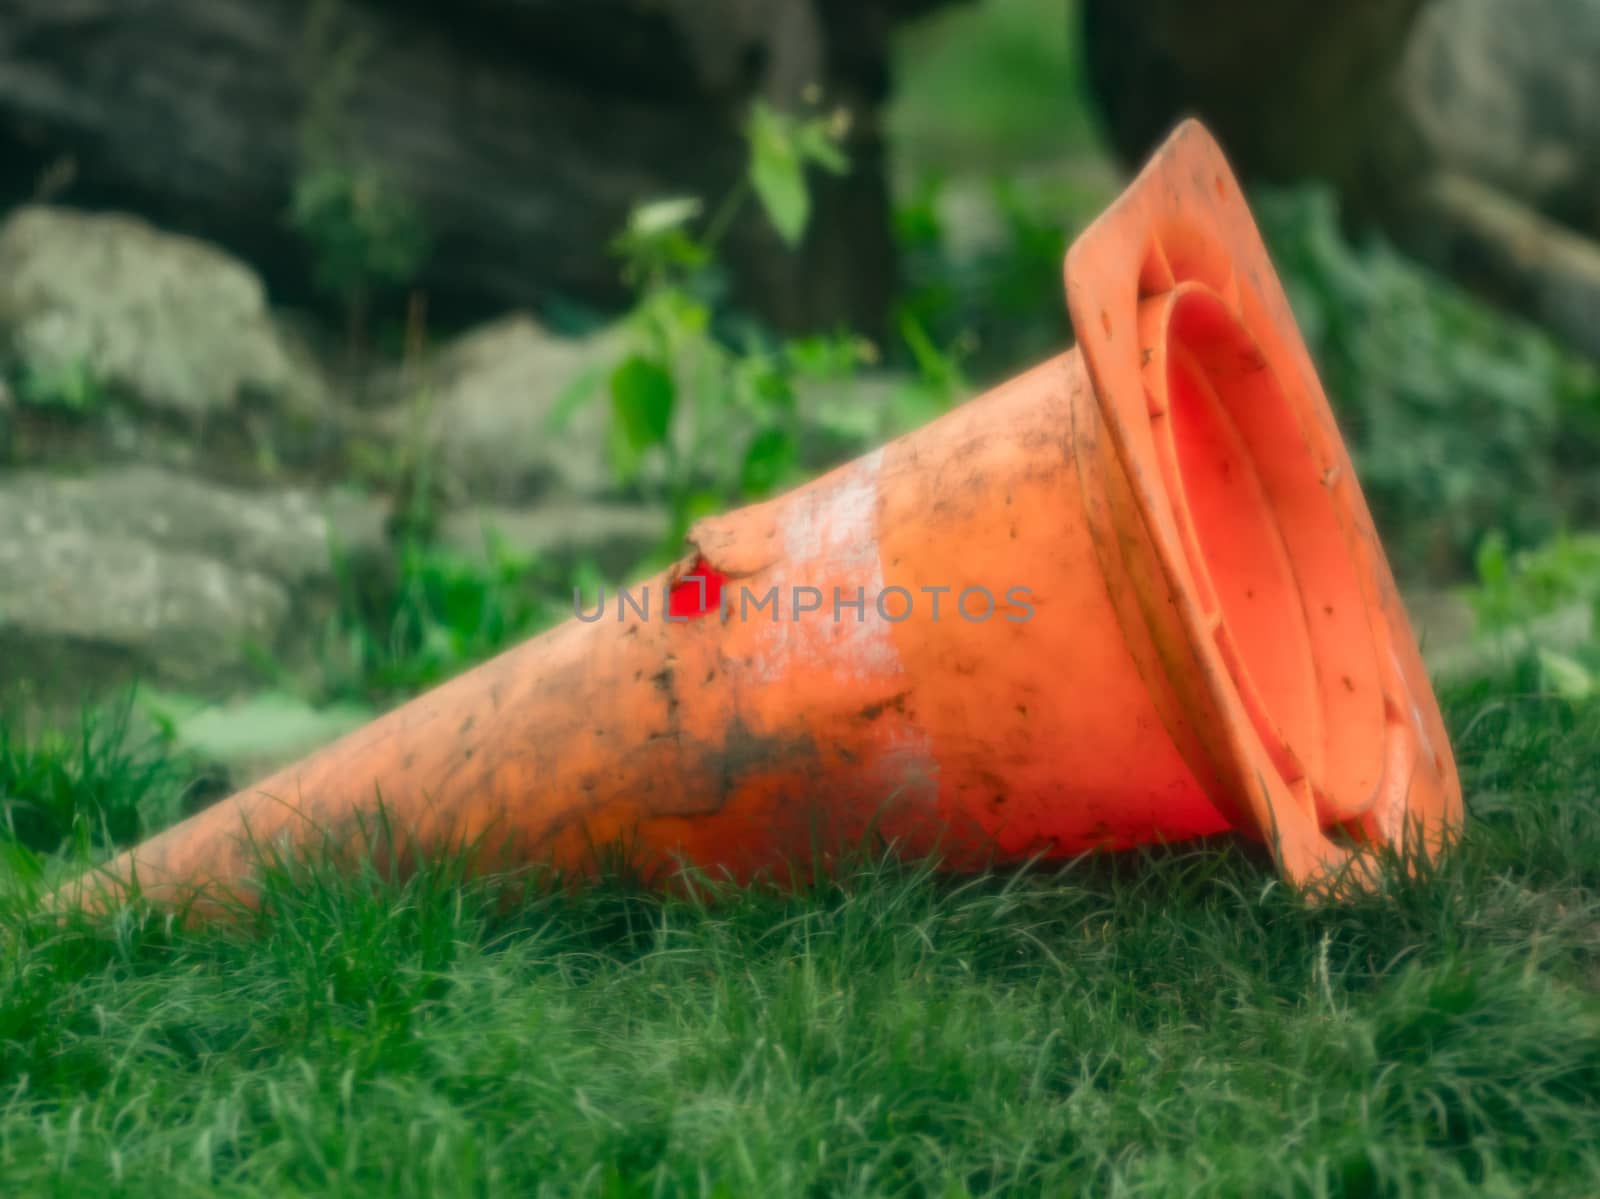 An orange traffic cone in the grass by sandra_fotodesign